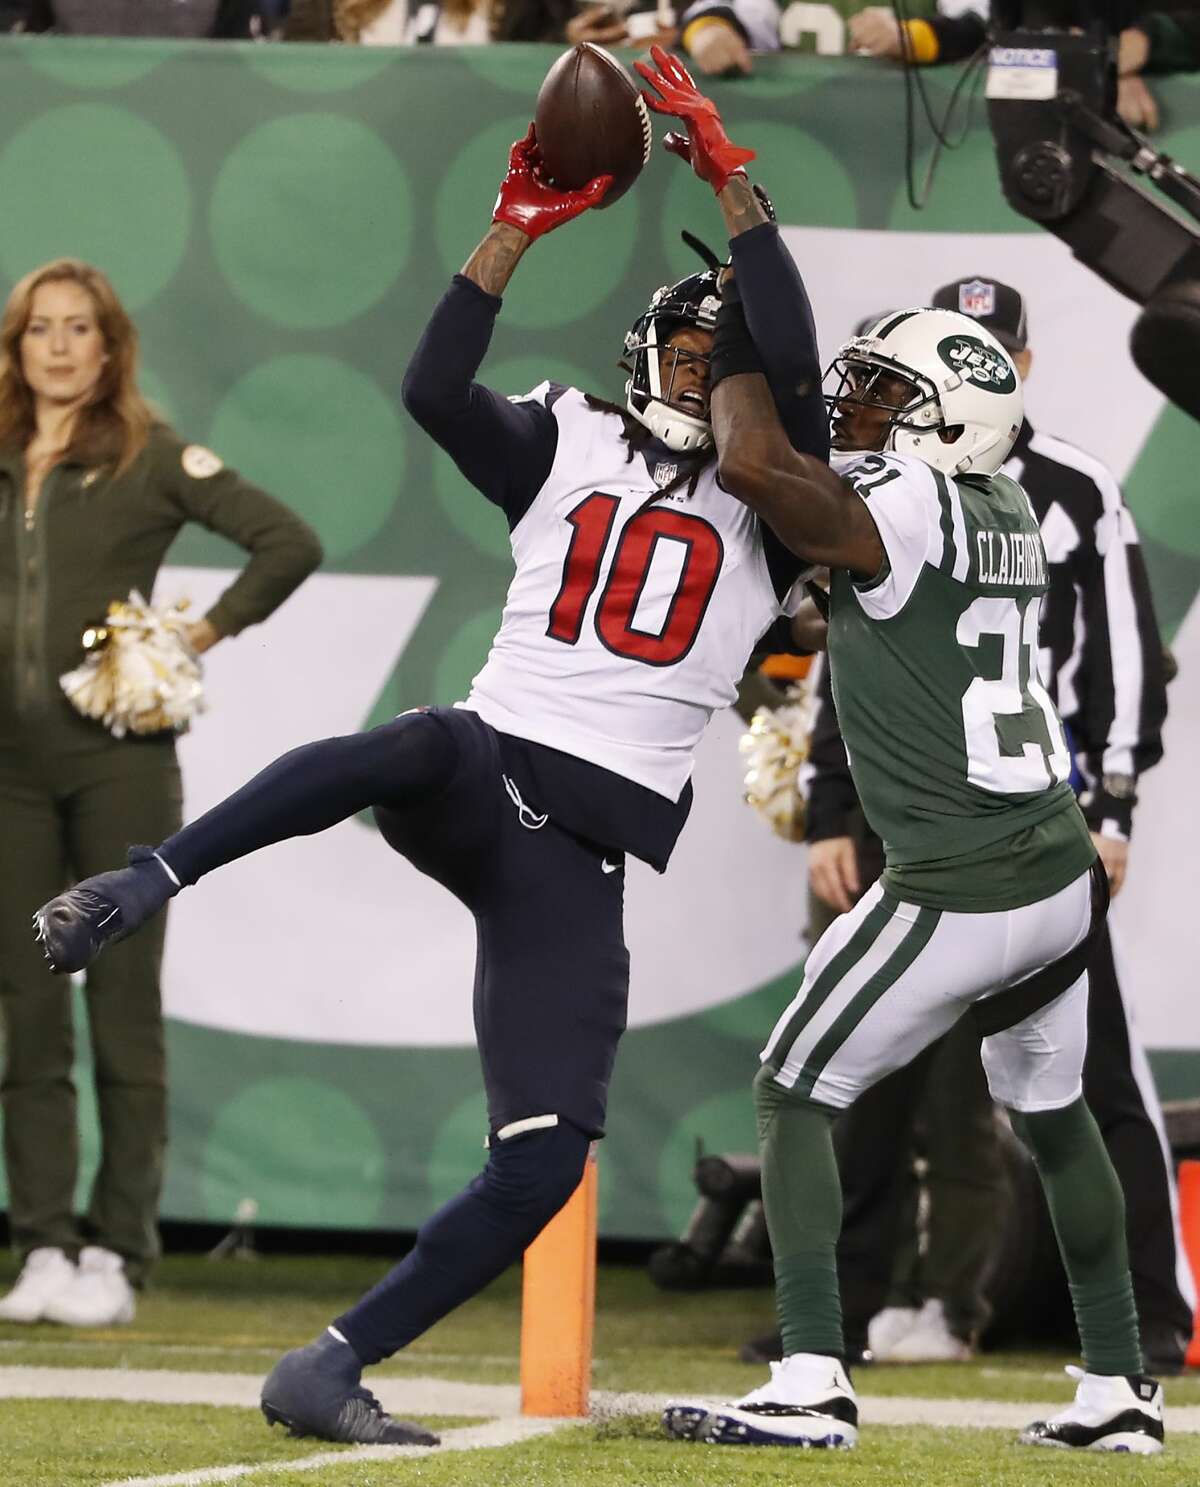 Houston Texans wide receiver DeAndre Hopkins (10) beats New York Jets cornerback Morris Claiborne (21) for a 14-yard touchdown reception during the fourth quarter of an NFL football game at MetLife Stadium on Saturday, Dec. 15, 2018, in East Rutherford, N.J.